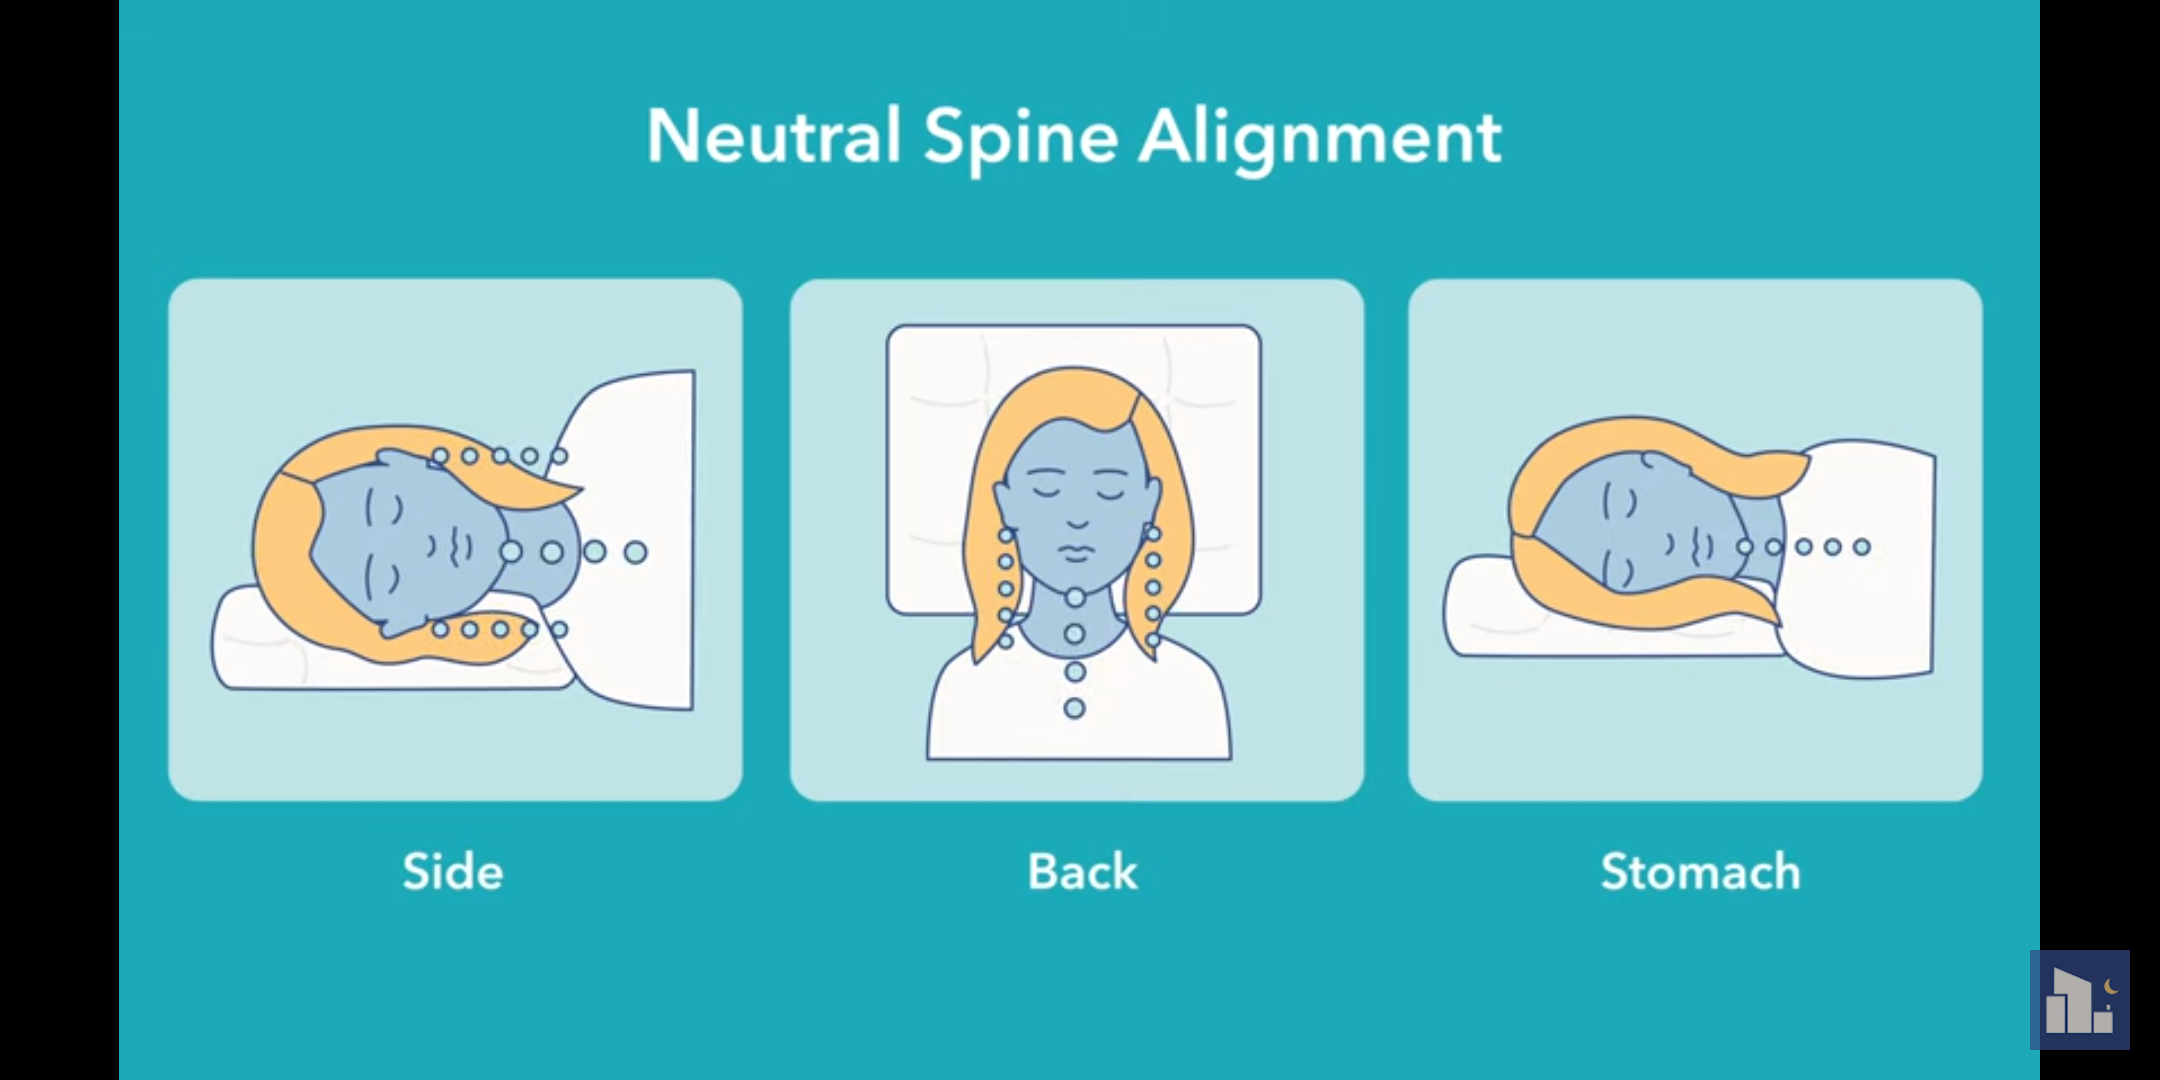 Neutral spine alignment